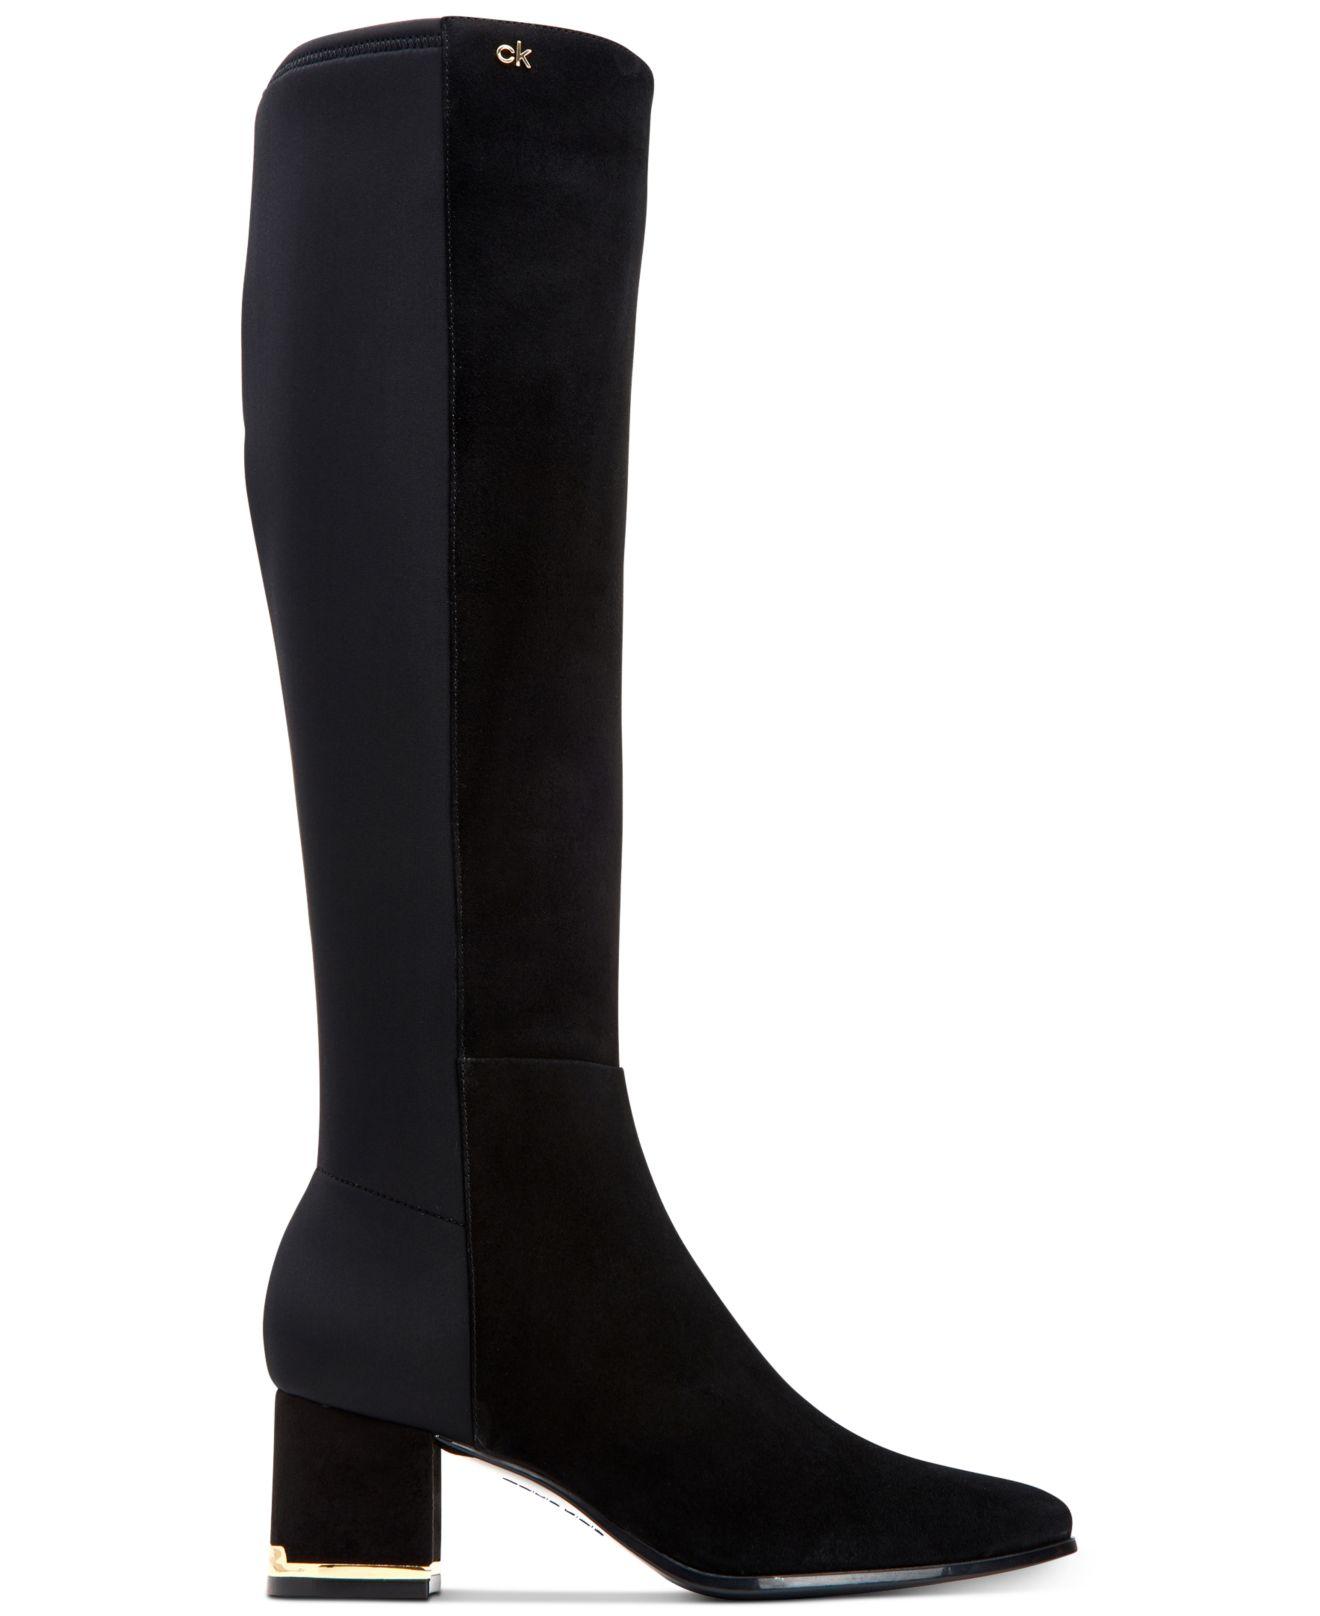 Calvin Klein Leather Freeda Tall Boots in Black Suede (Black) - Lyst